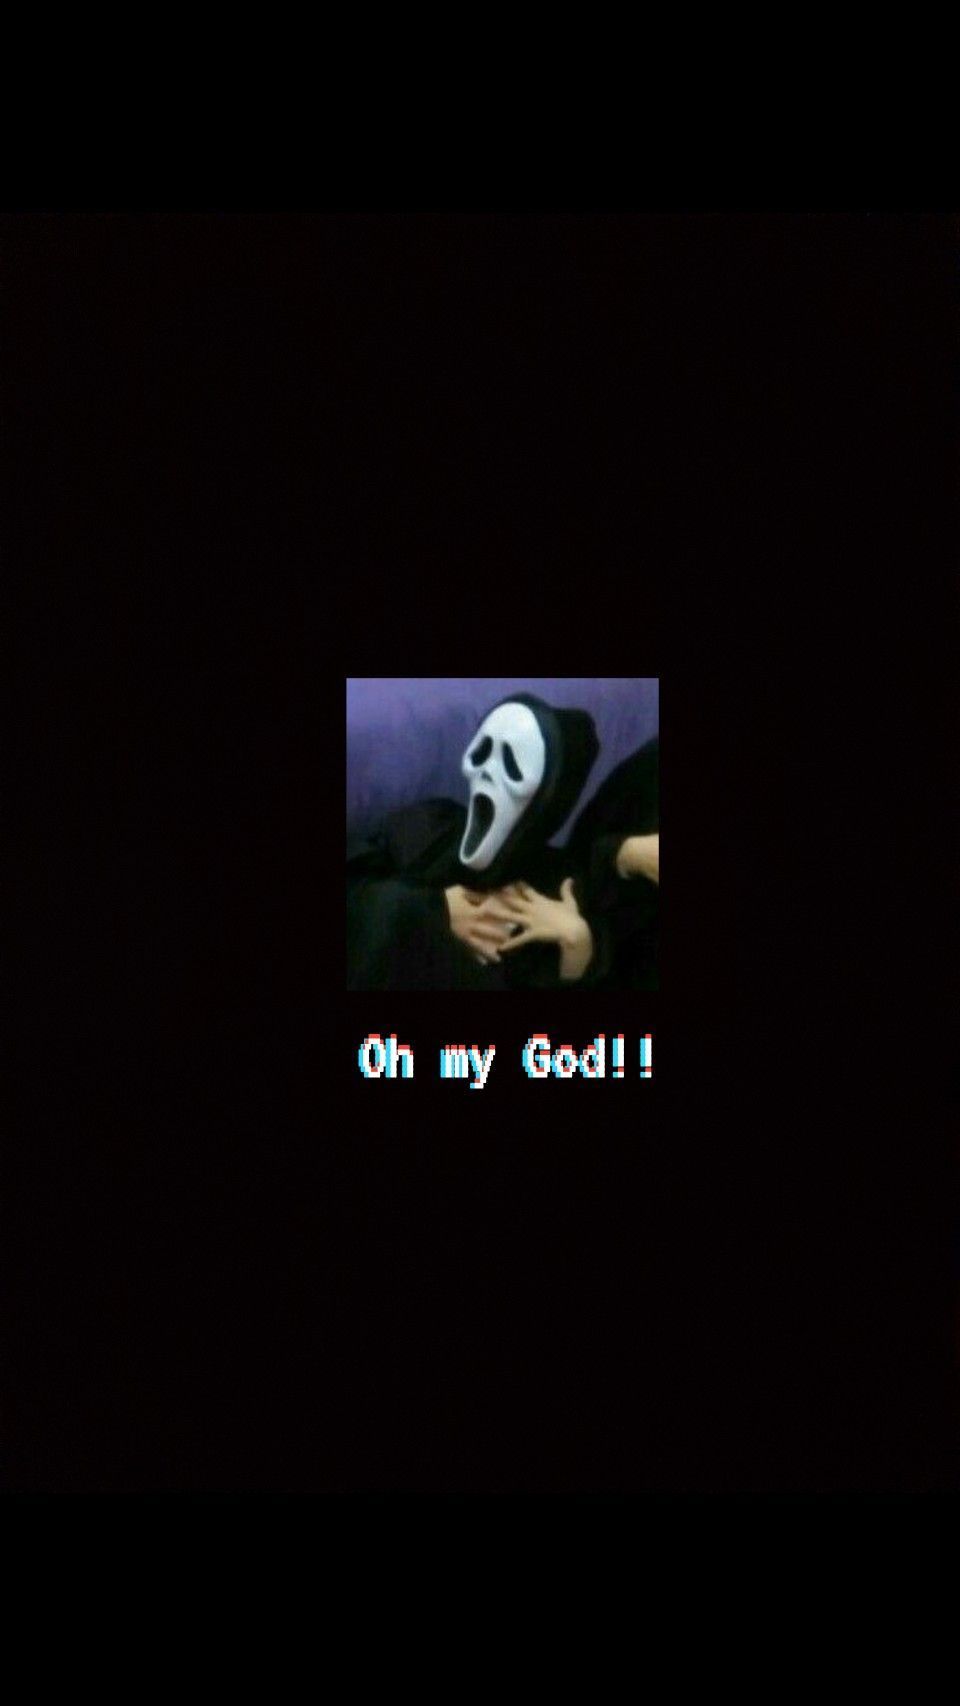 Ghostface wallpaper. Scary wallpaper, Scream picture, Stranger things scary